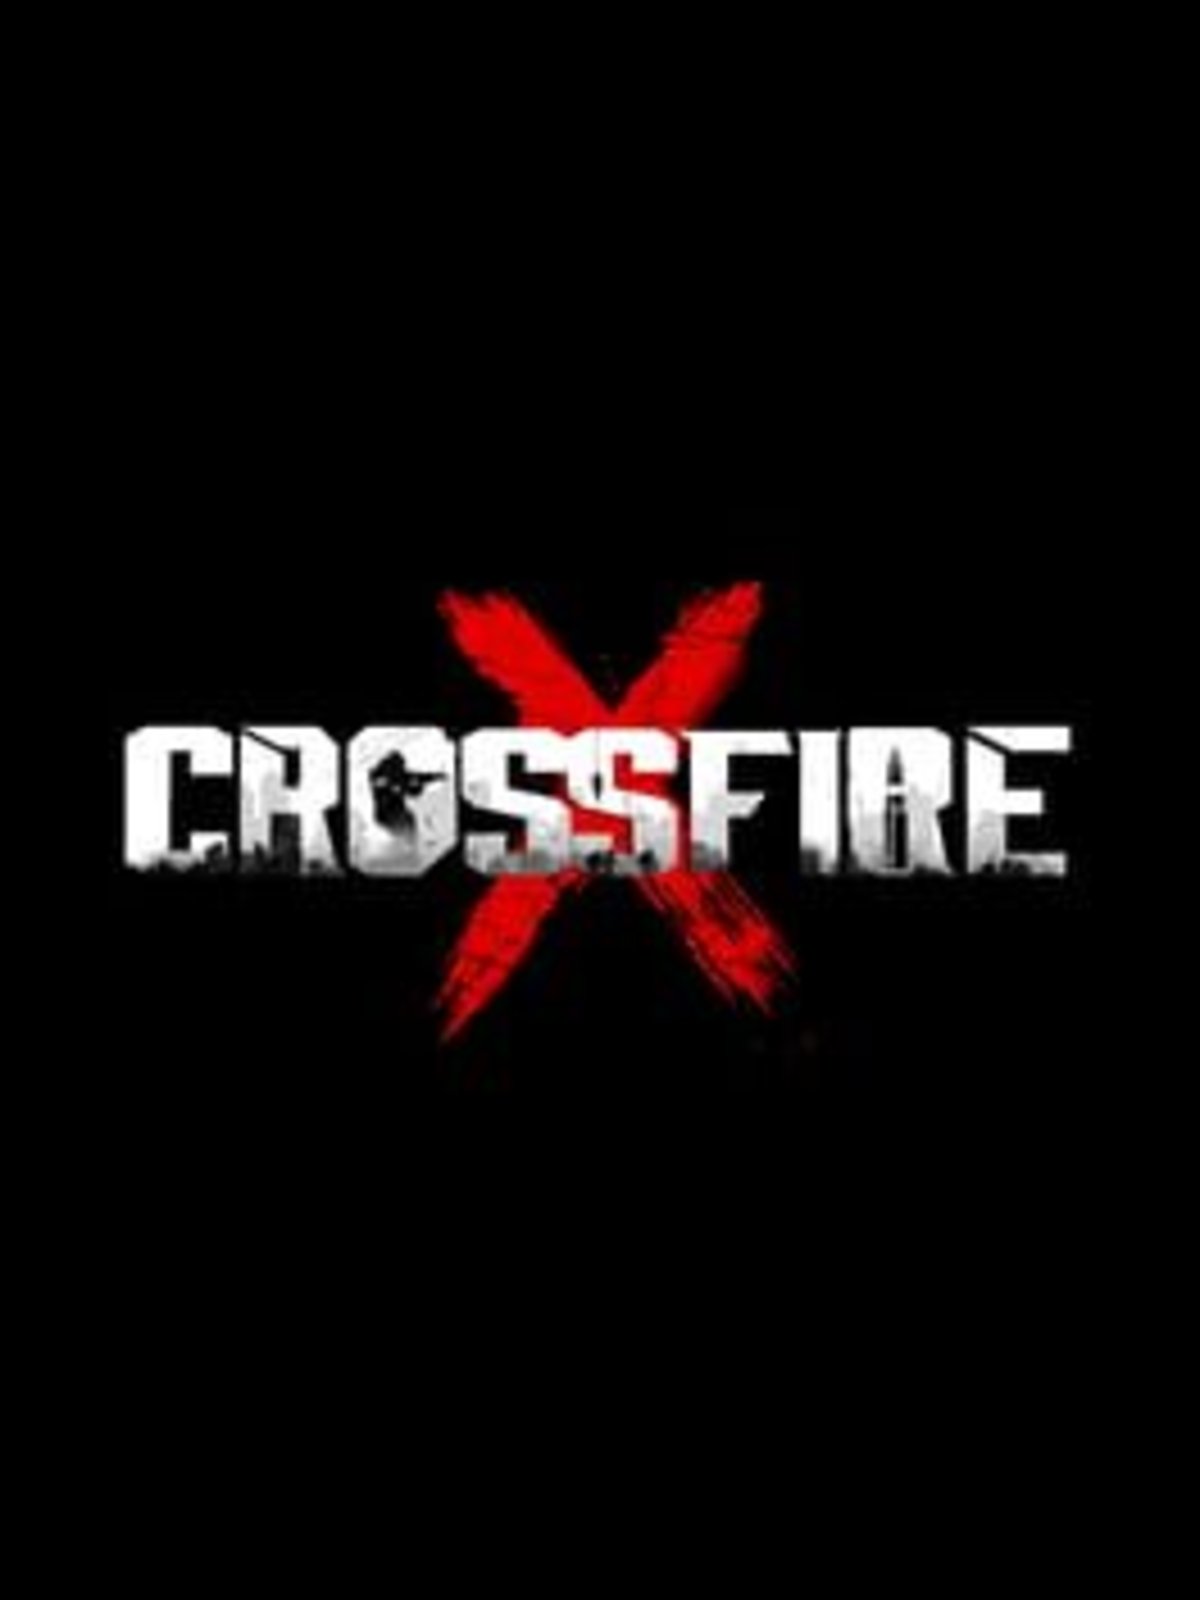 CrossfireX confirms its launch in 2021 and offers news